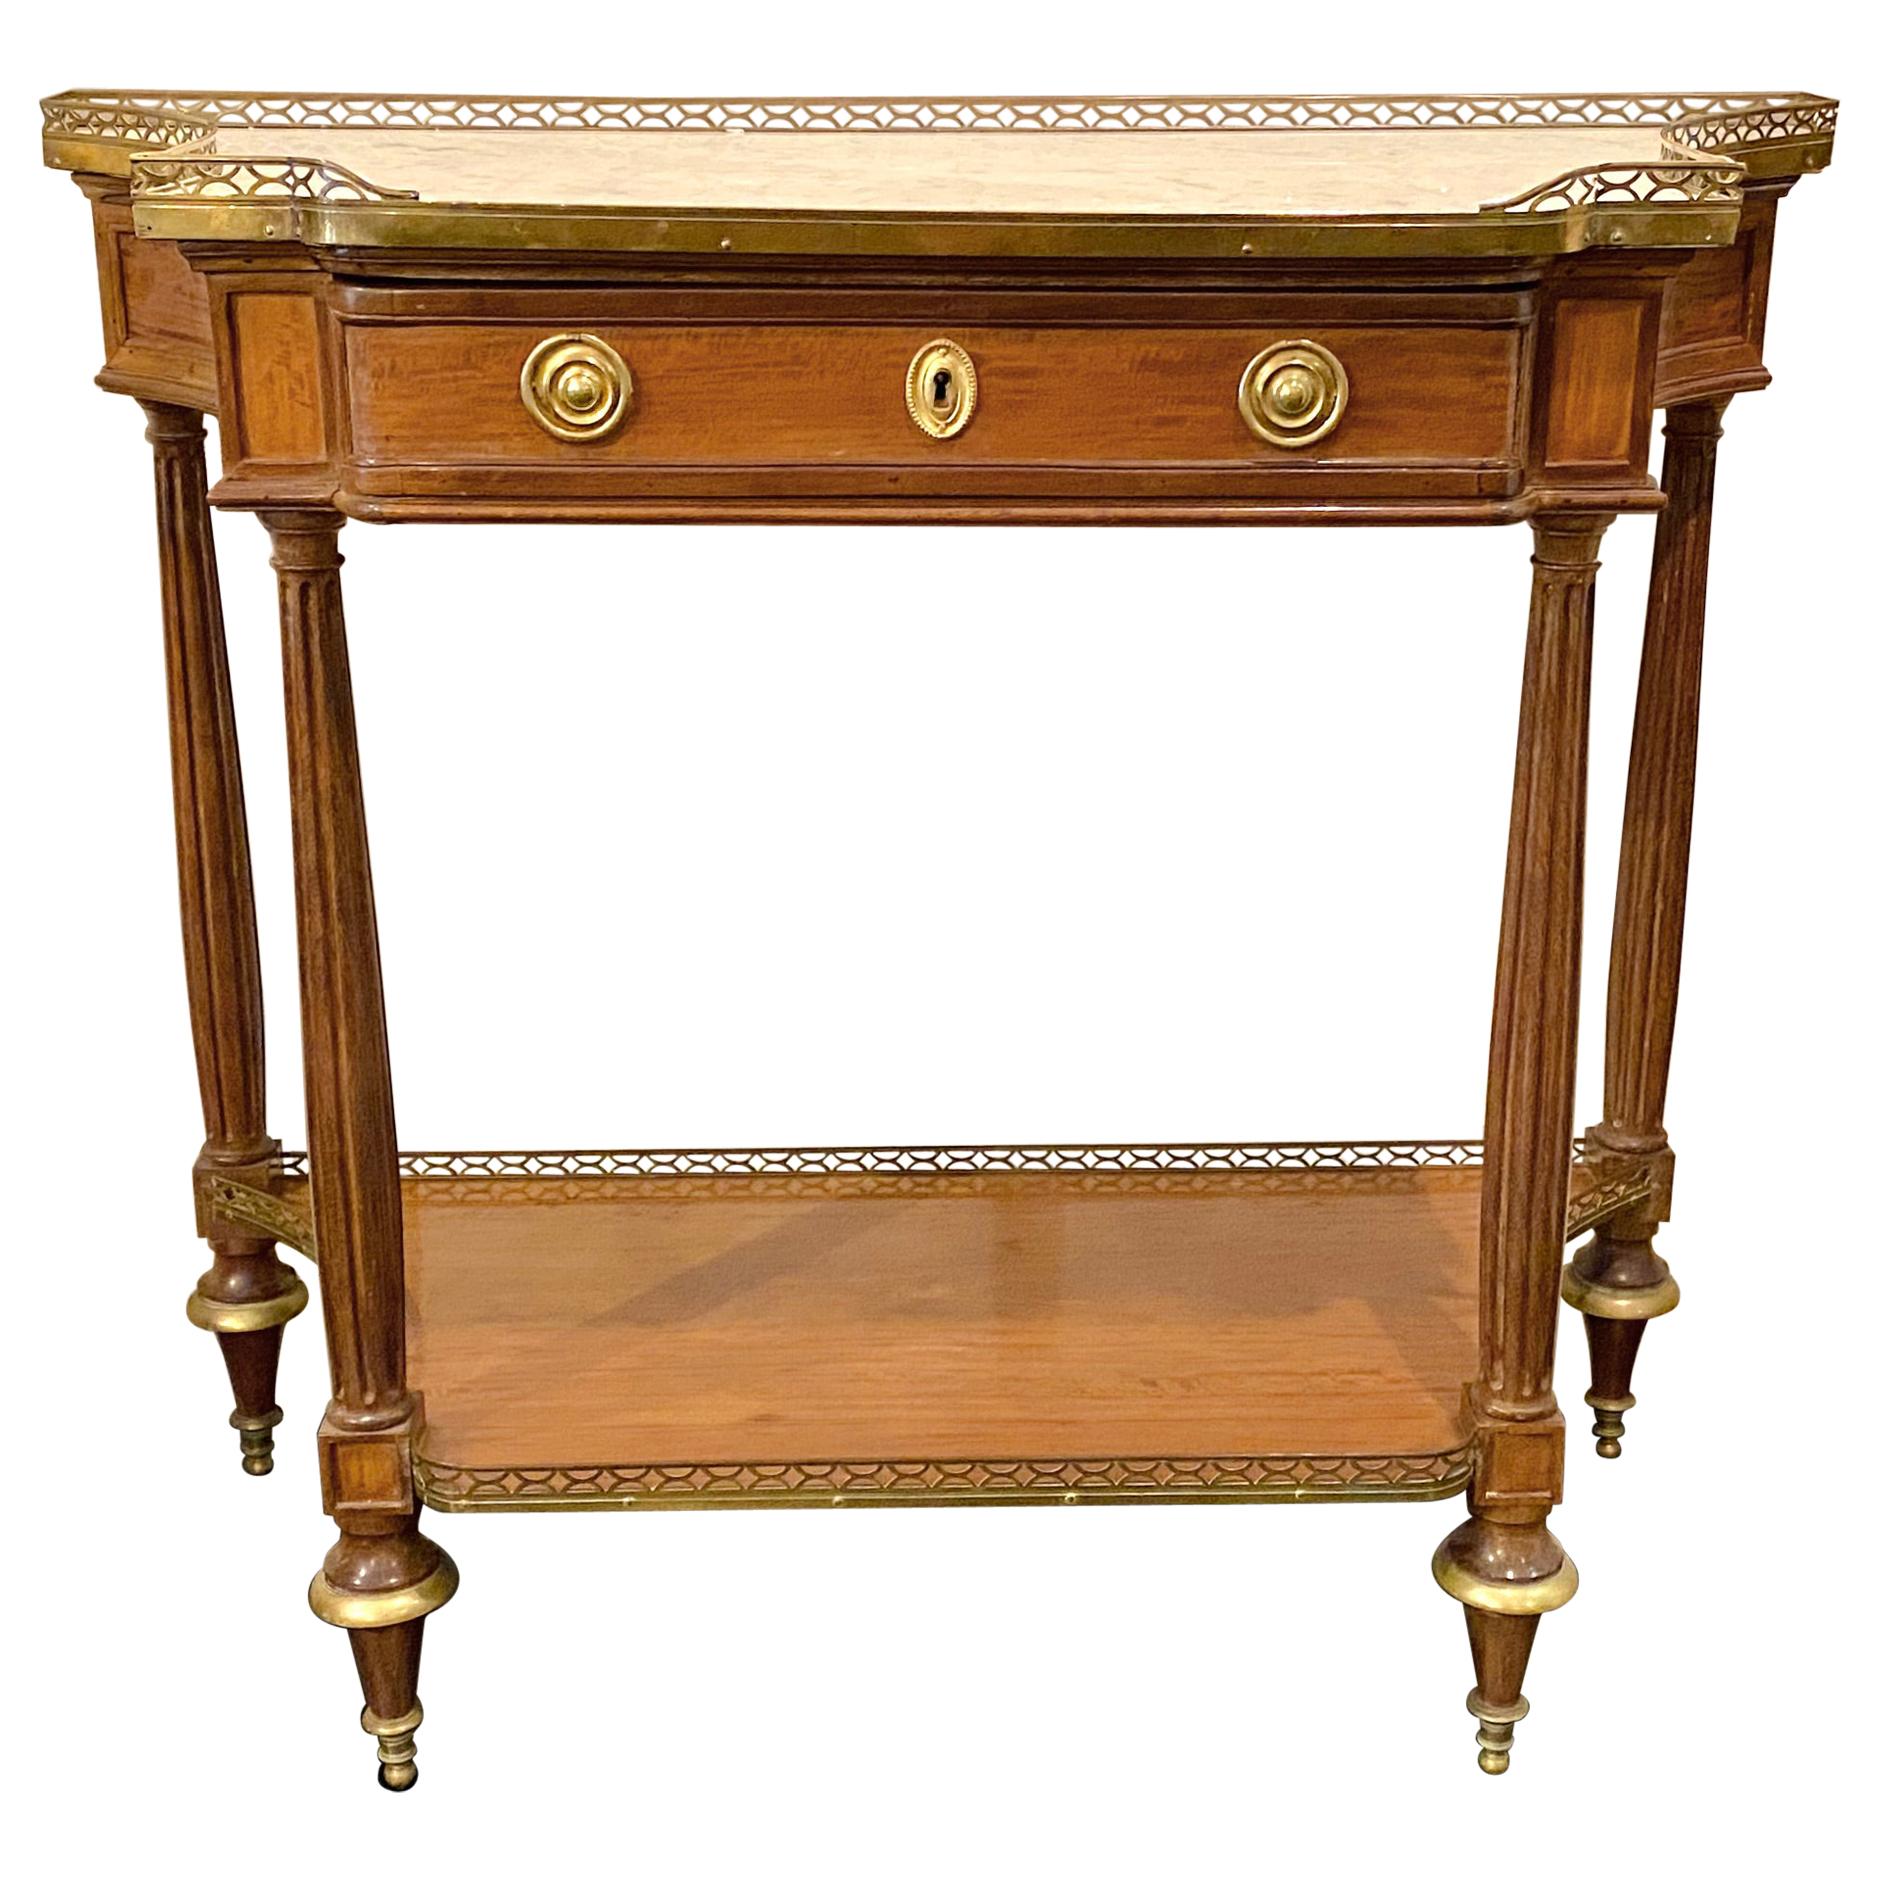 Louis XVI Style, Marble Top Console, Bronze Gallery, Early 19th Century